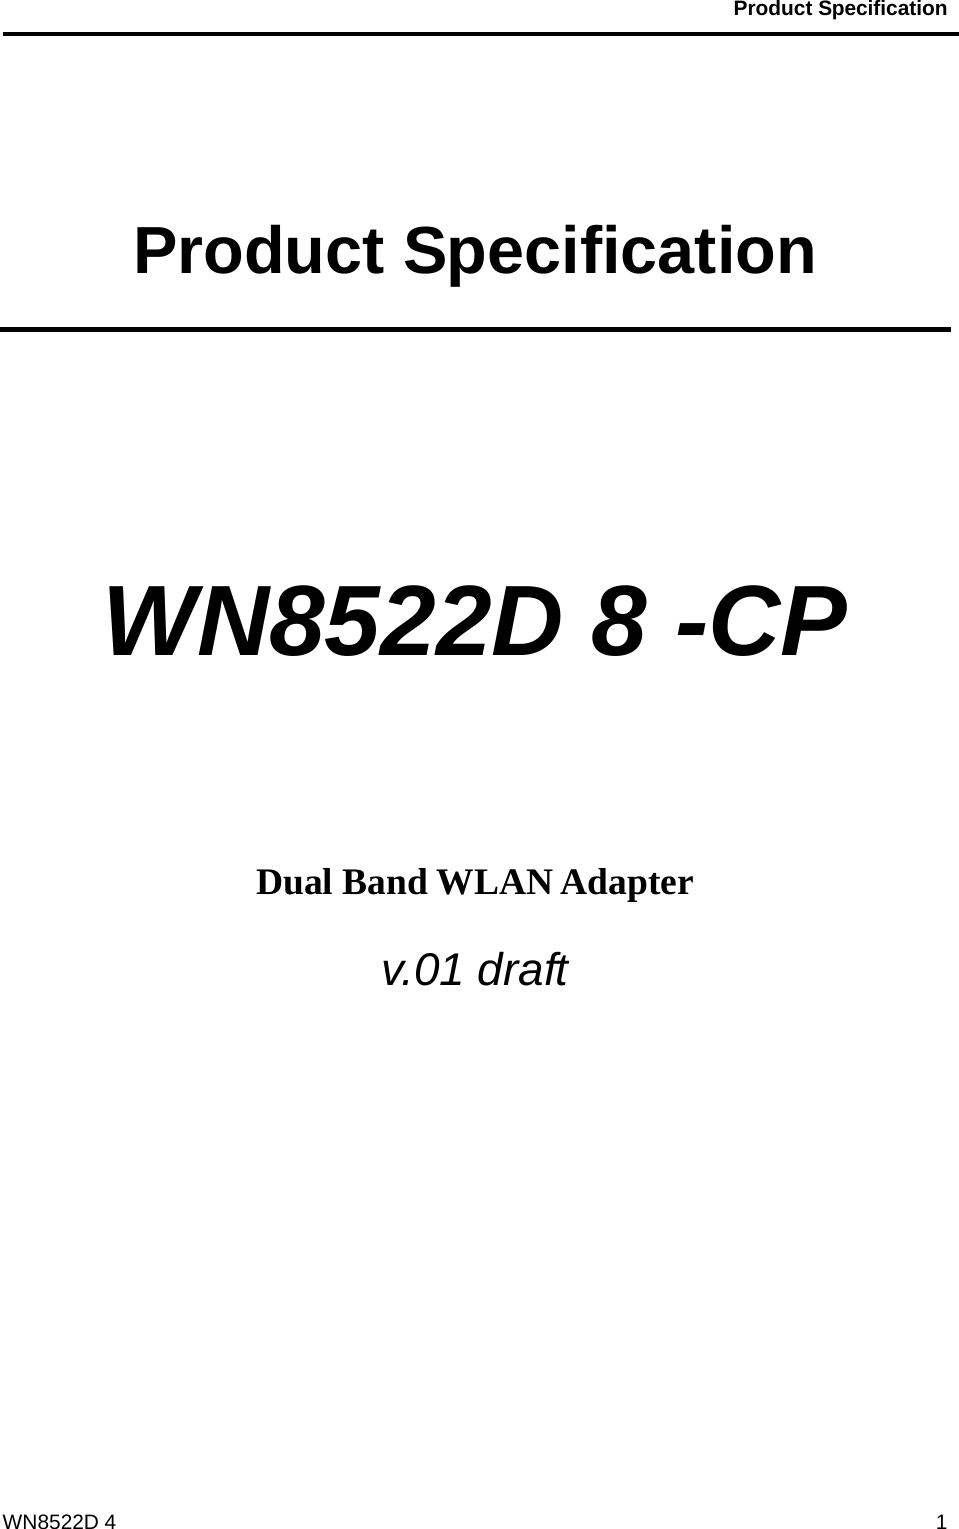                                           Product Specification                                              WN8522D 4  1 Product Specification   WN8522D 8 -CP     Dual Band WLAN Adapter v.01 draft    